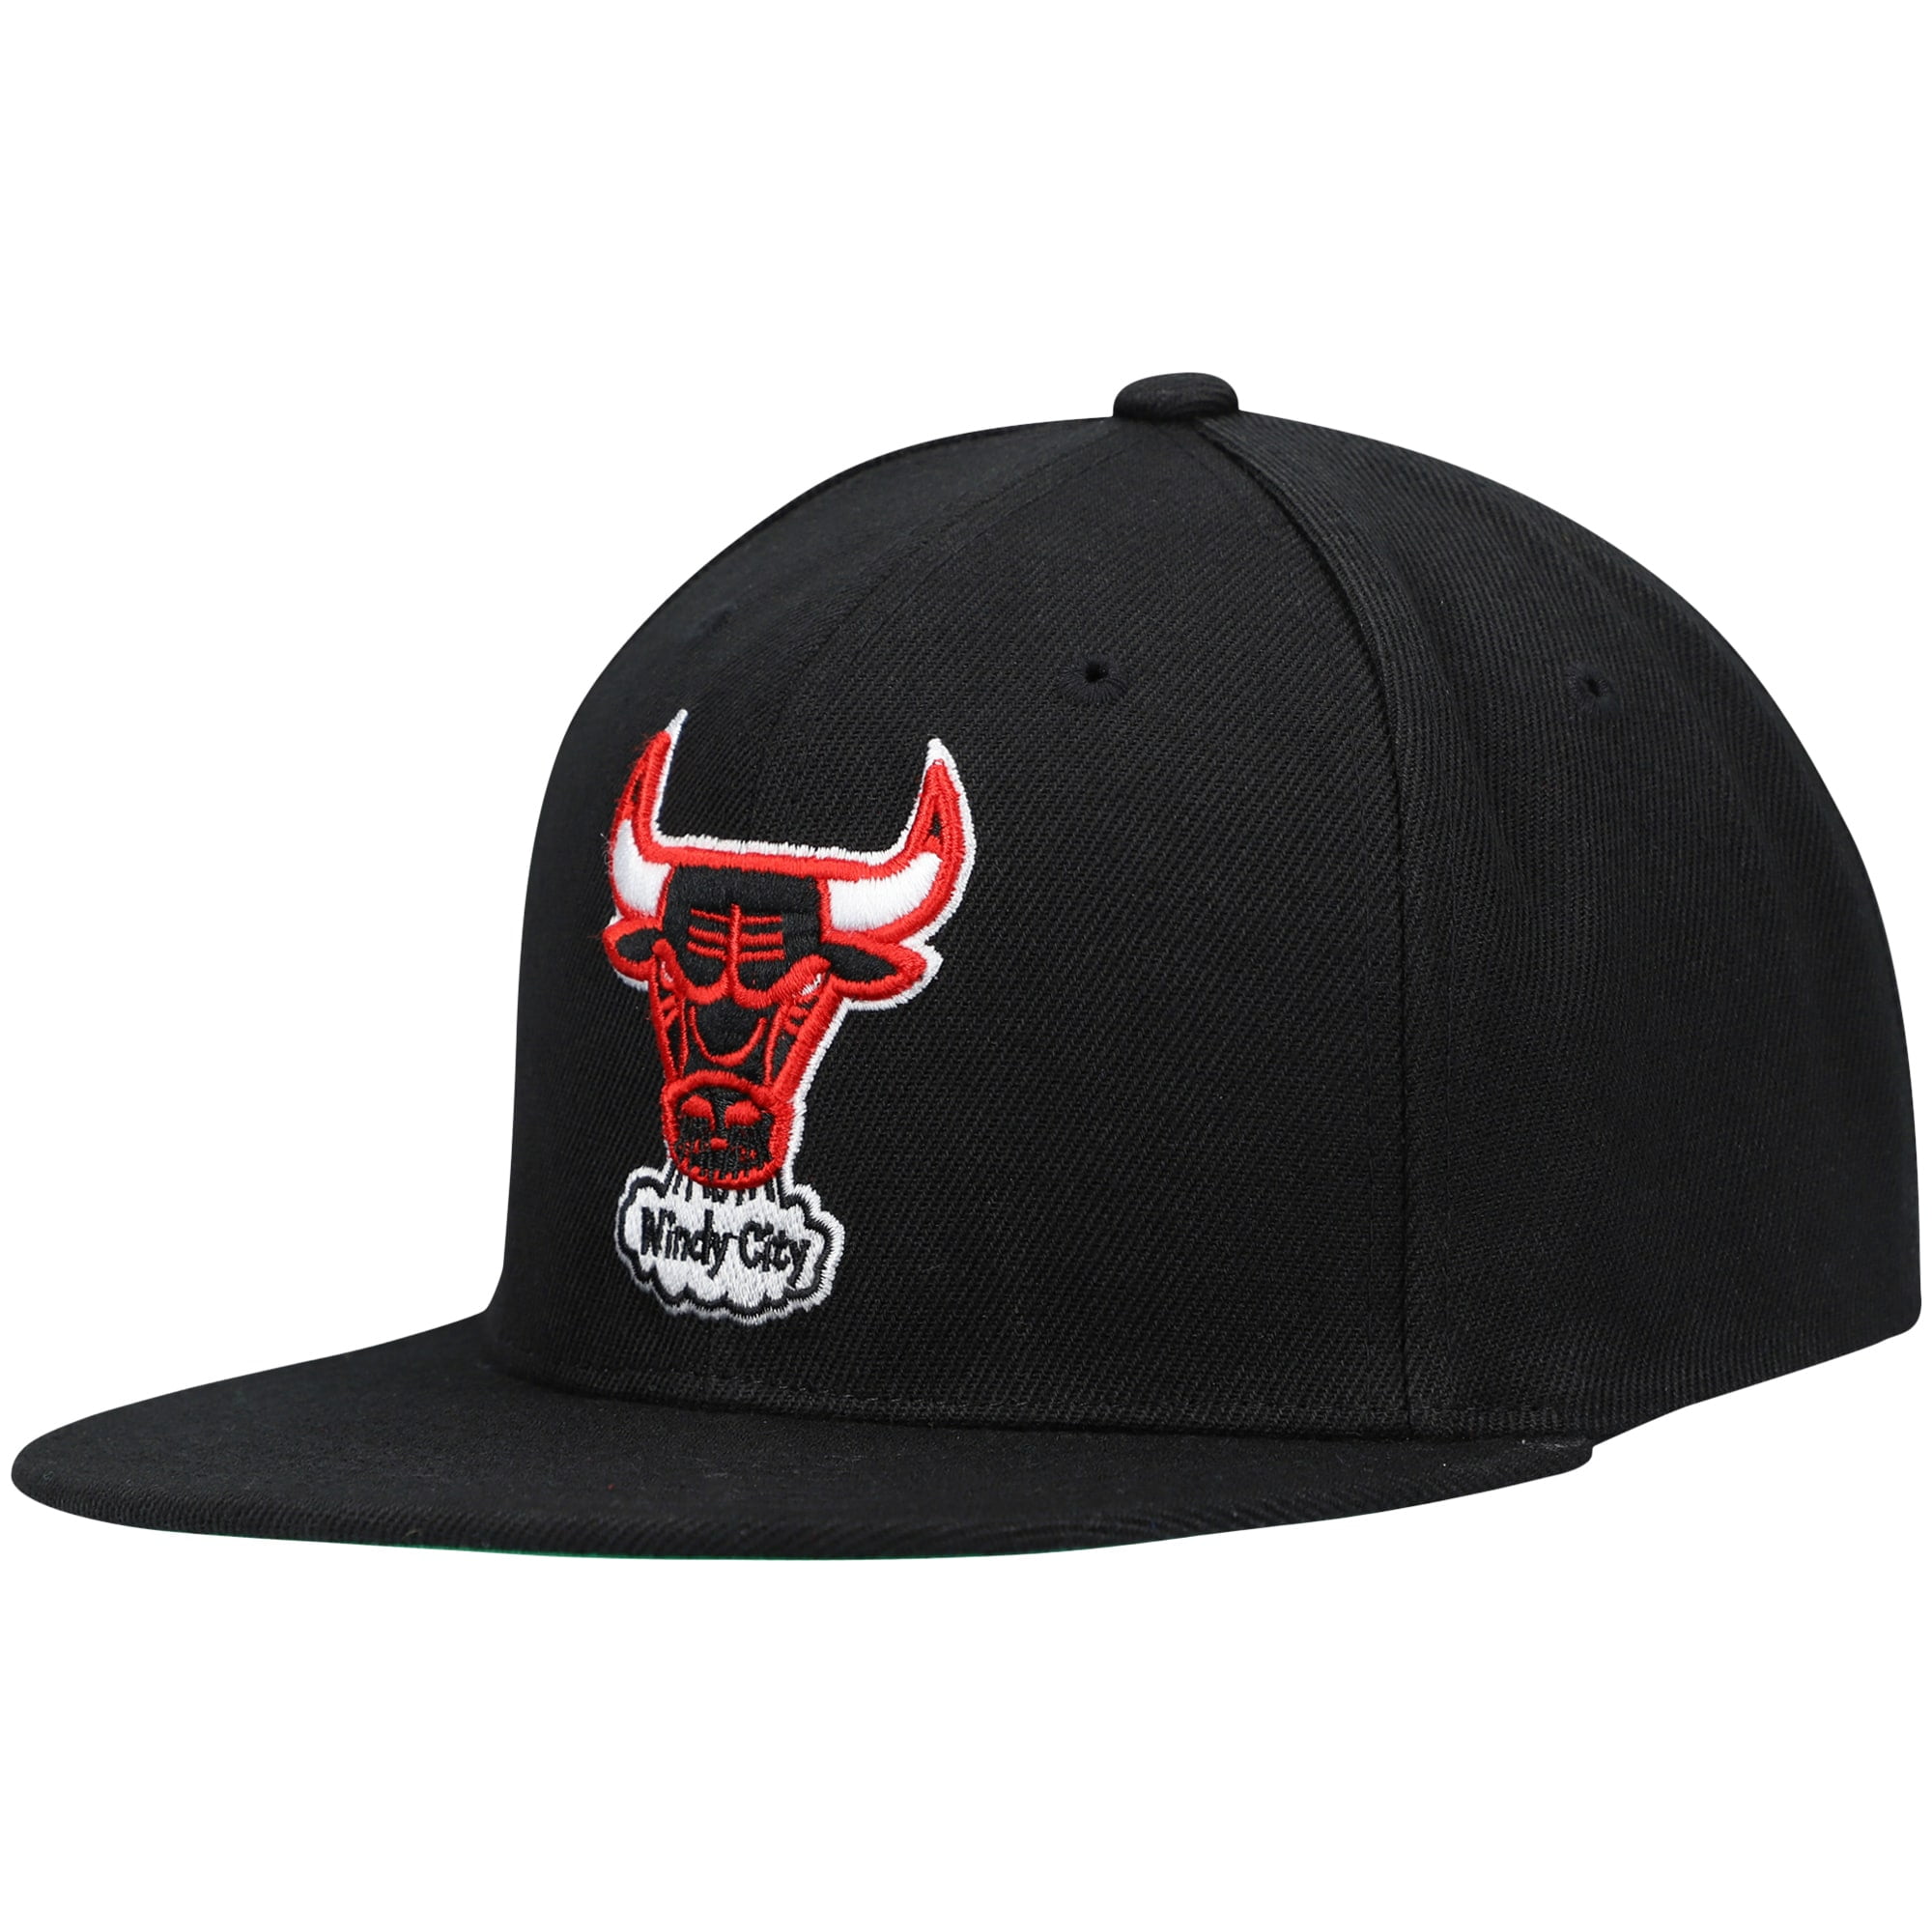 What are your thoughts on - Die-Hard Chicago Bulls Fans